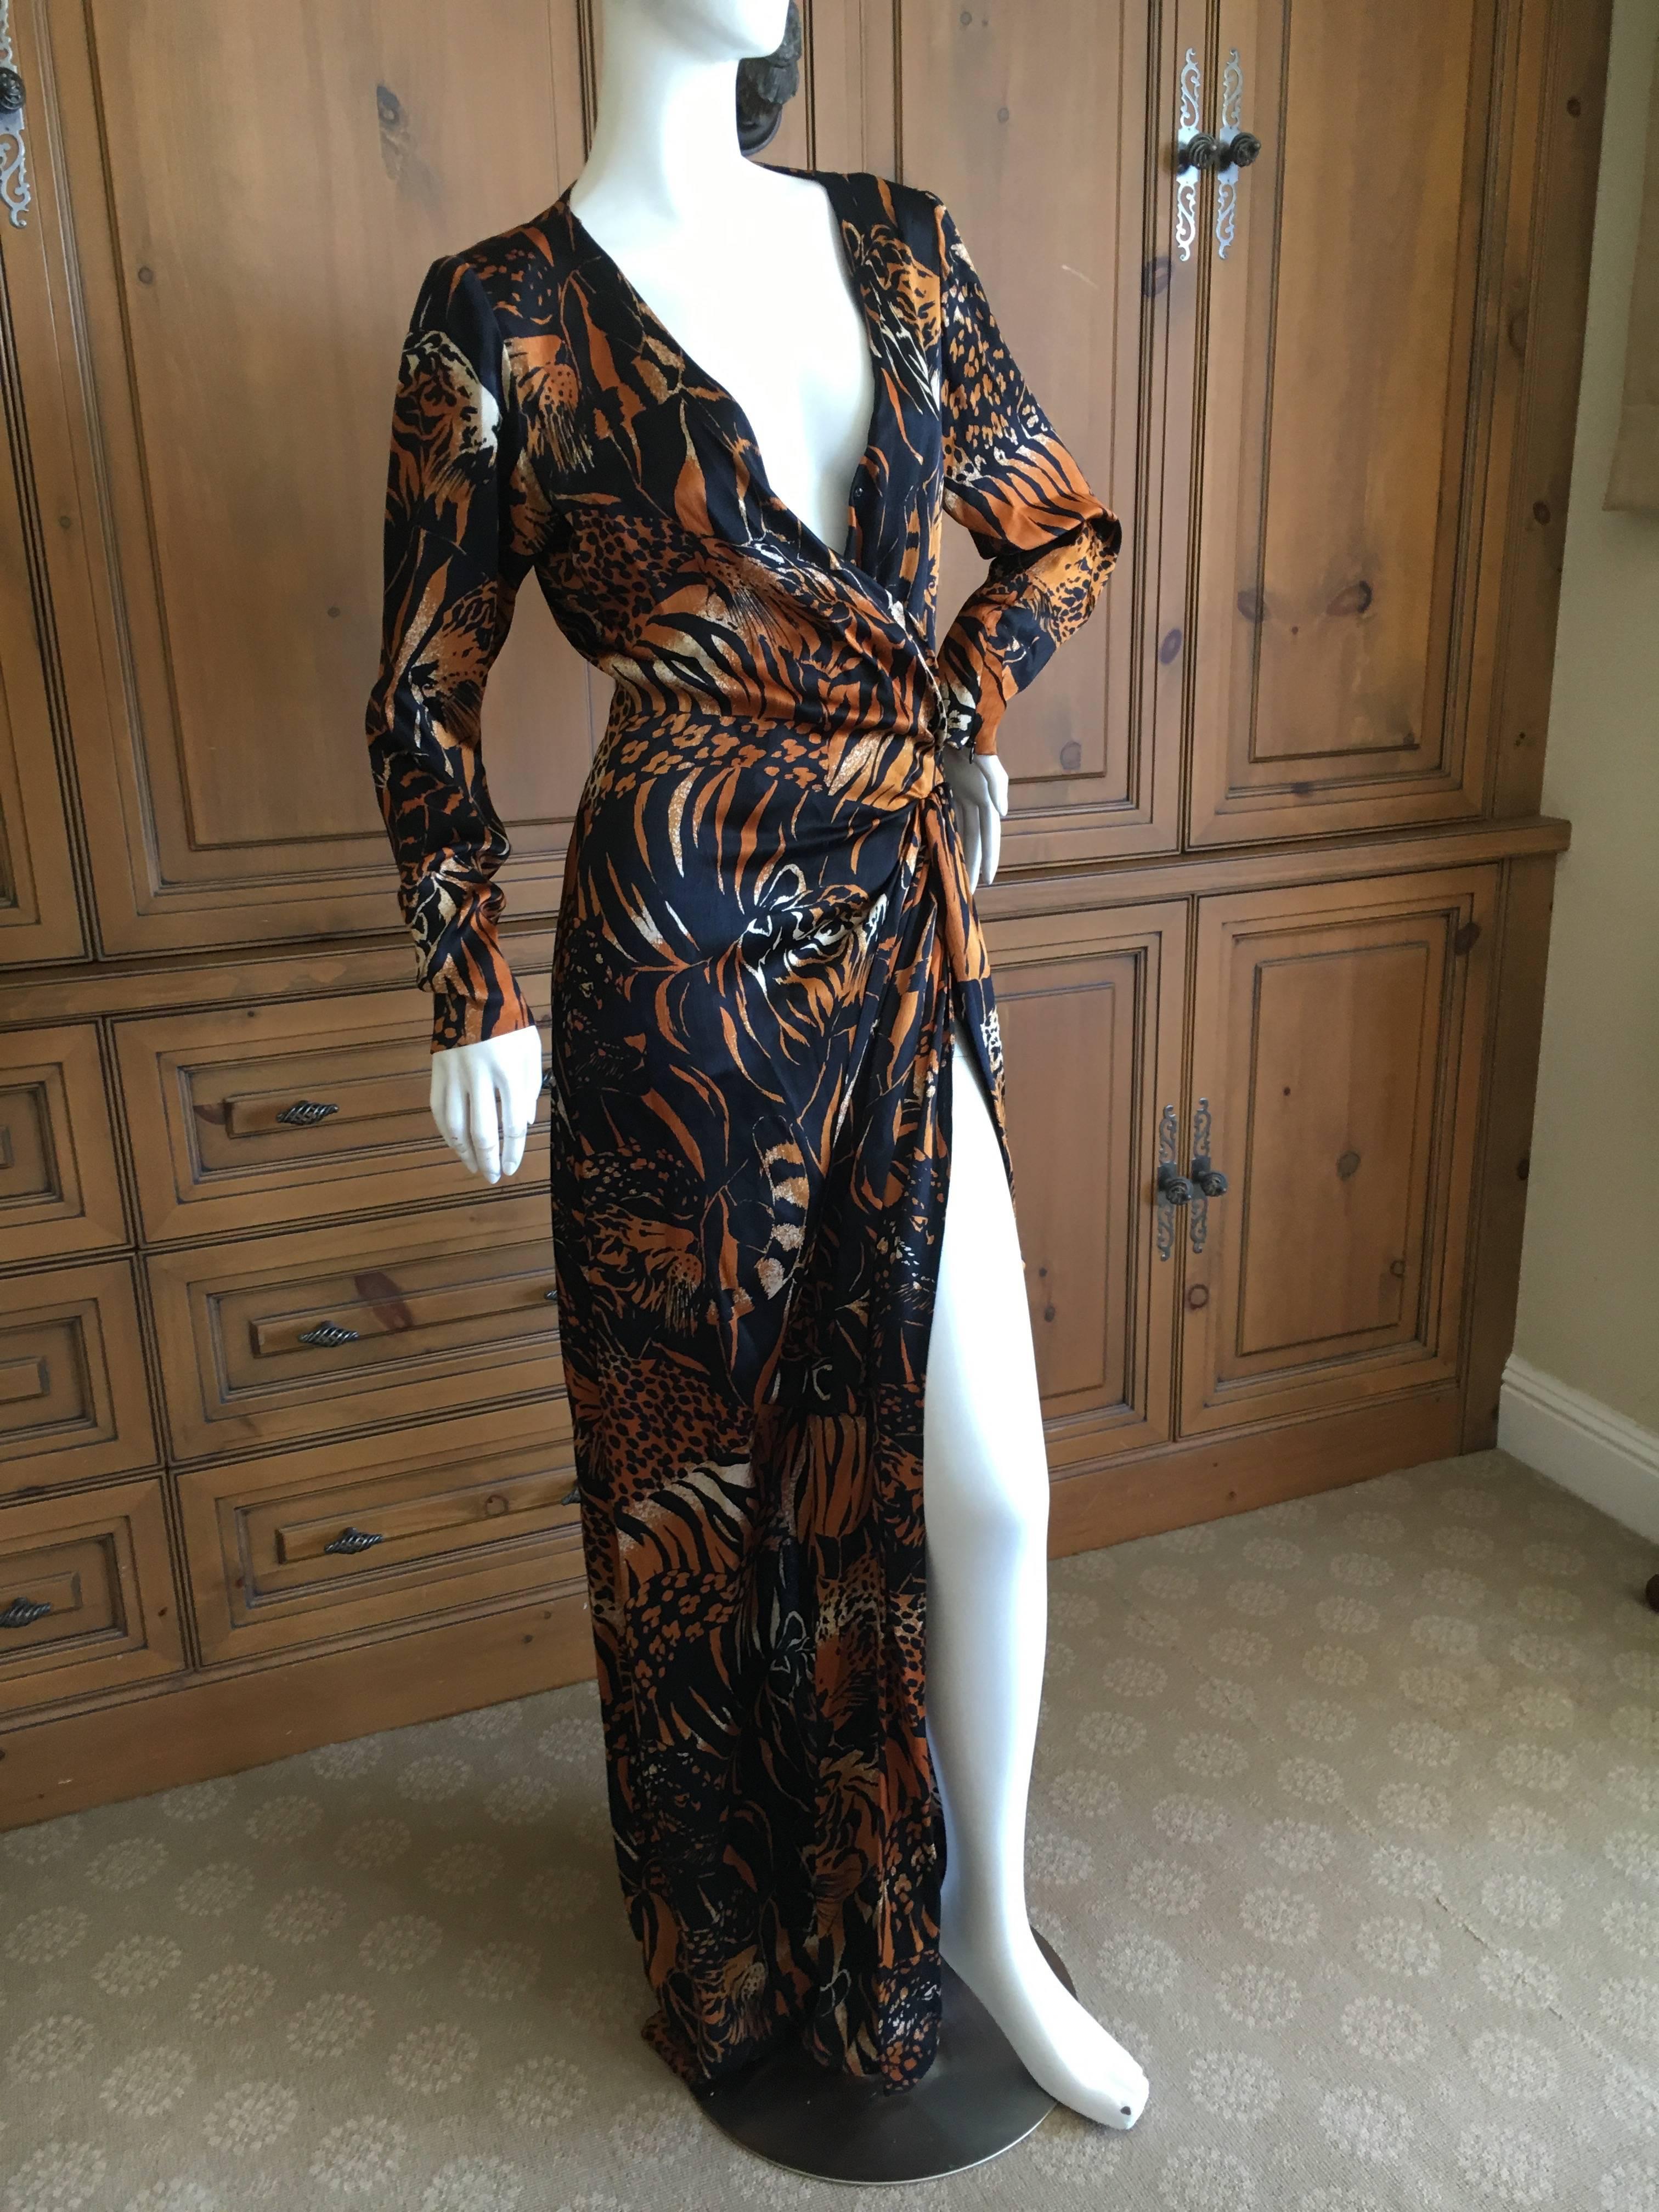 Yves Saint Laurent Rive Gauche Vintage 1980's Tiger and Leopard Print Long Dress.
This is a wrap style, which closes with hook's and eyes.
There is a button higher up on the neck for modesty, but I show it unbuttoned .
This is a sensational dress,